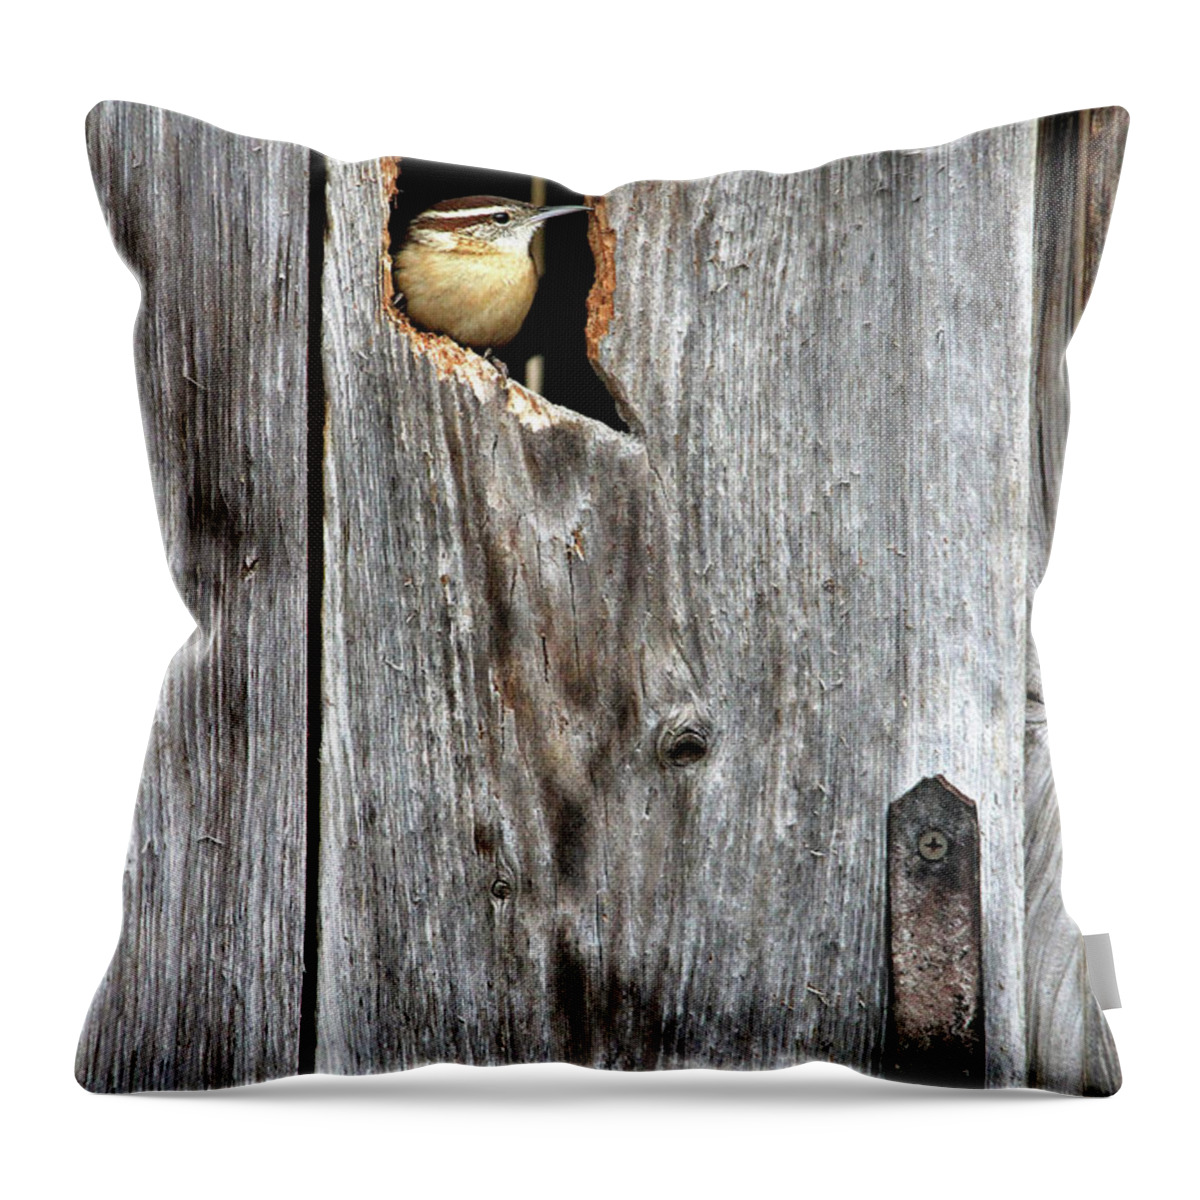 Birds Throw Pillow featuring the photograph In The Outhouse Shed by Trina Ansel